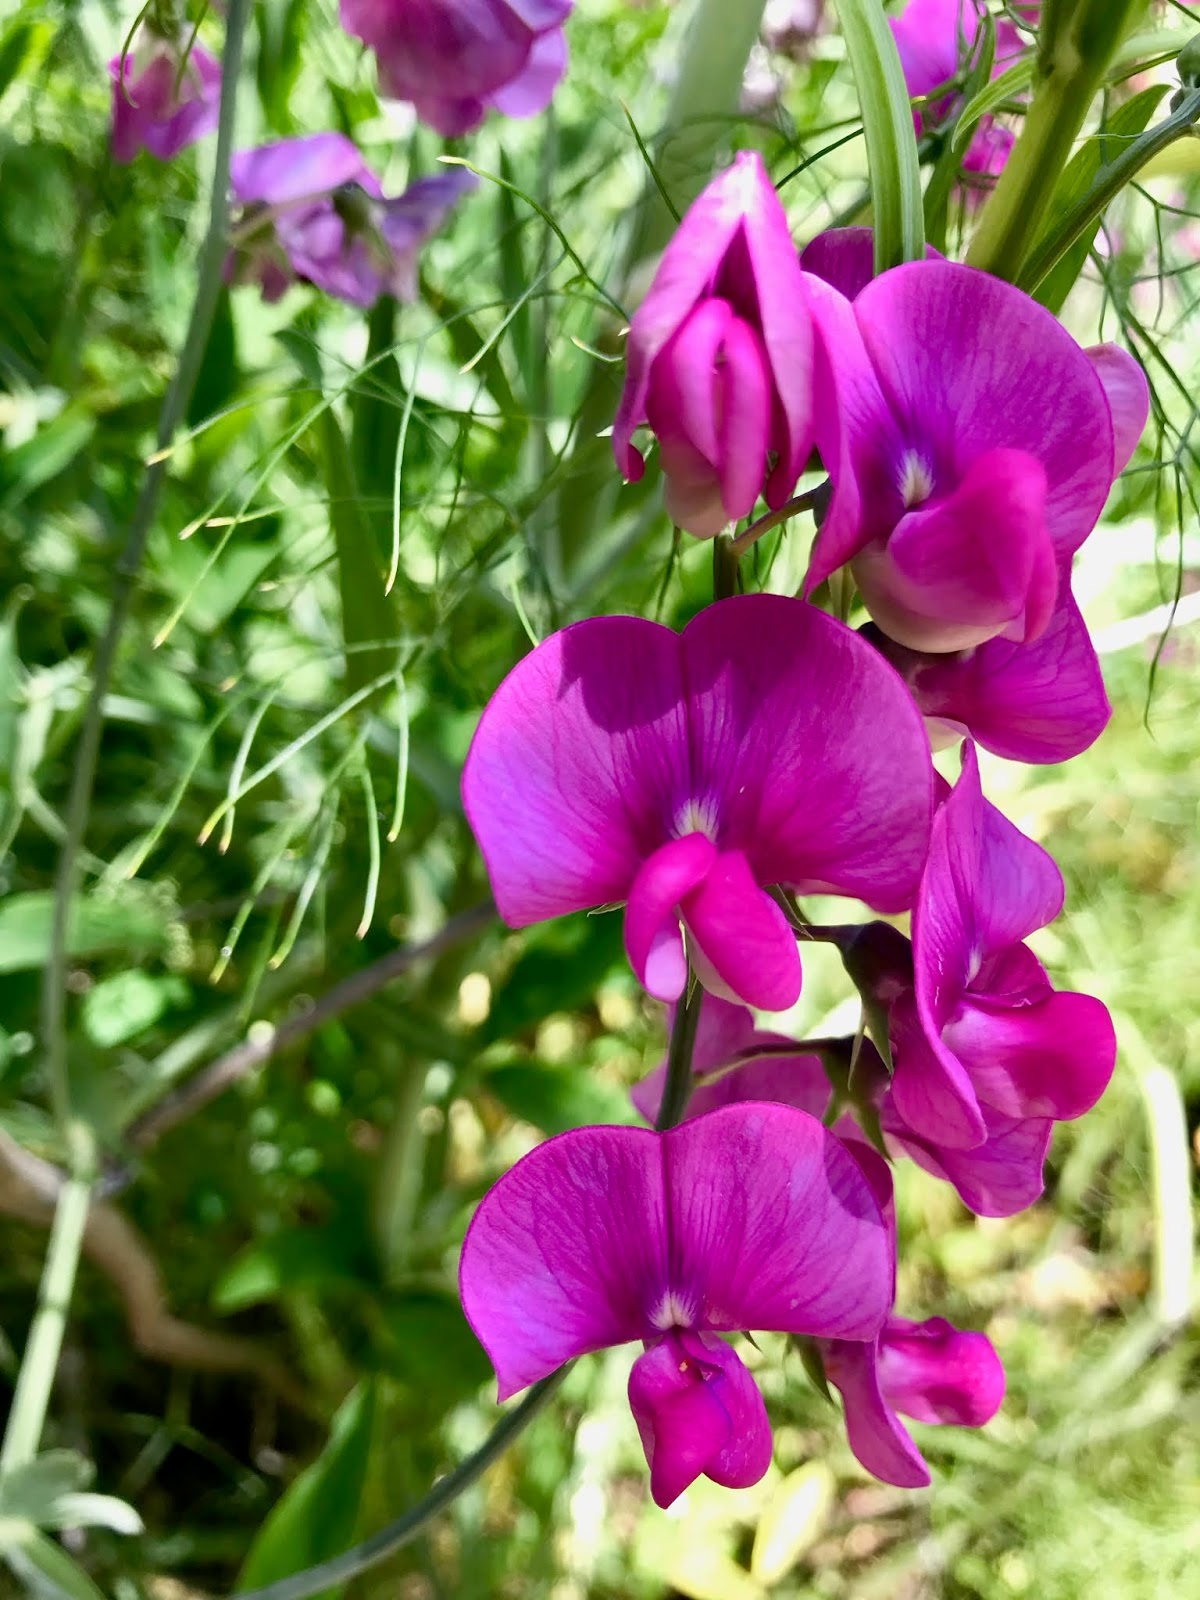 Can it happen here?: Saturday scenery: the avenue of the pink sweet peas